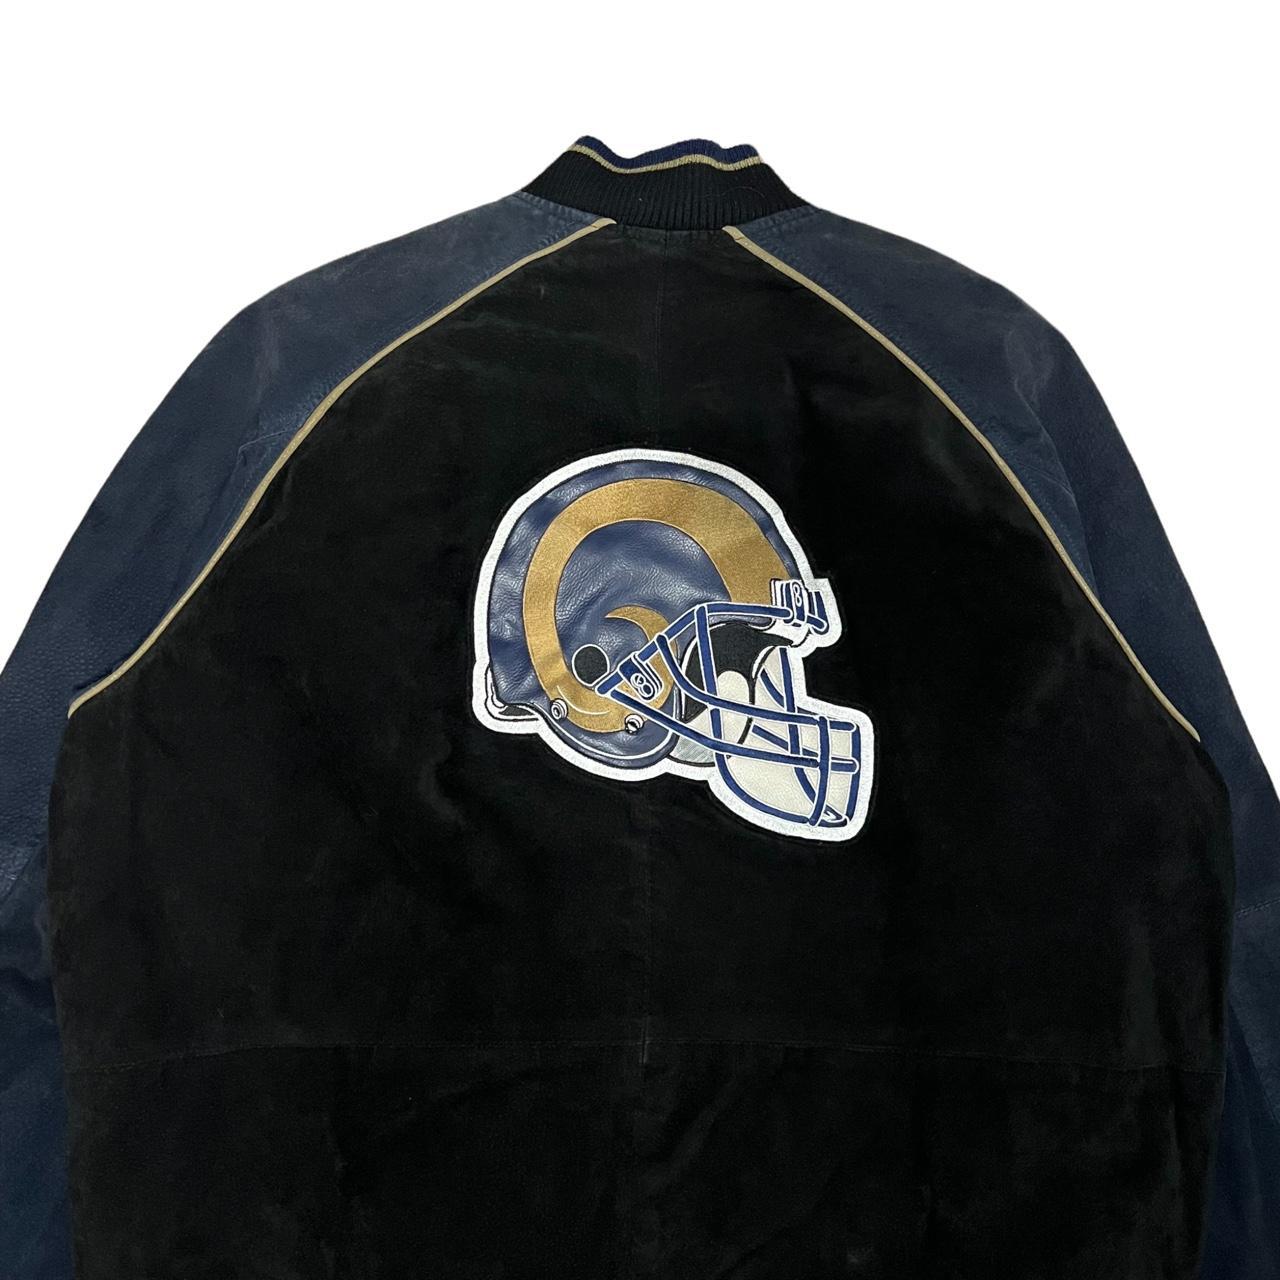 Product Image 3 - Retro Rams Jacket

- Great Condition!
-